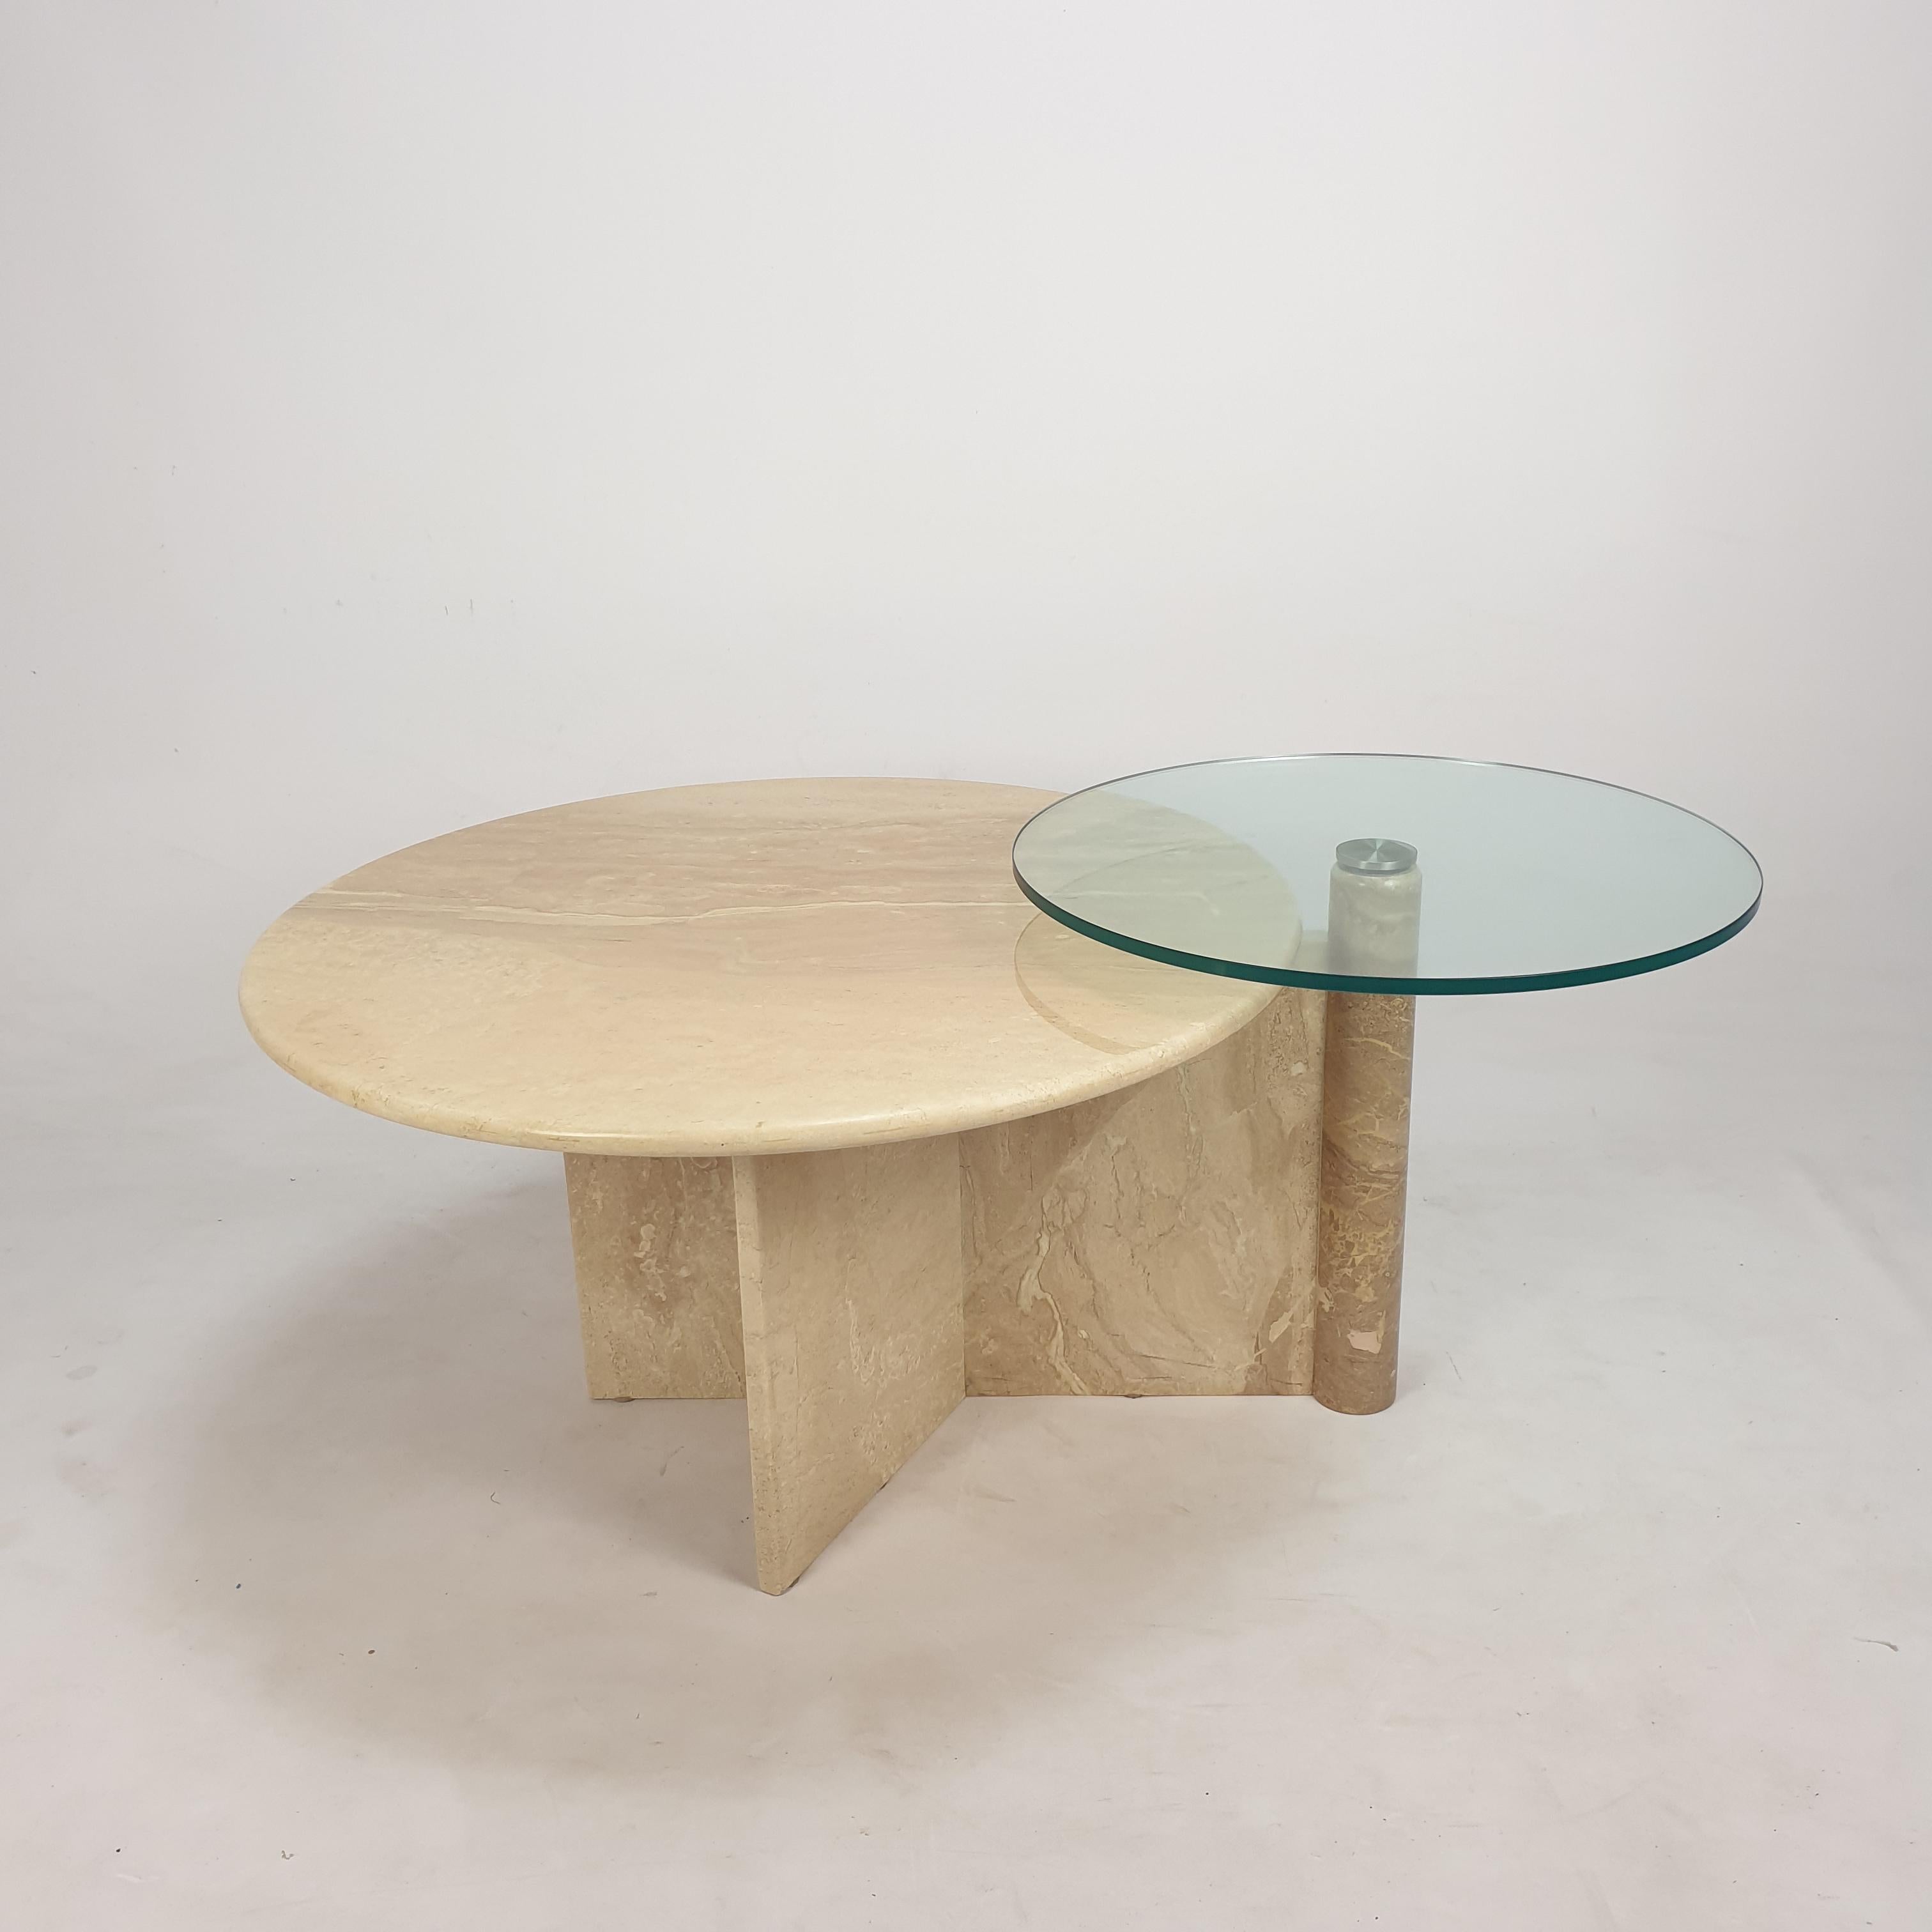 Very nice Italian coffee table from the 80's, handcrafted out of travertine. 
One round travertine plate and one turnable glass plate.

The table is made of beautiful travertine.